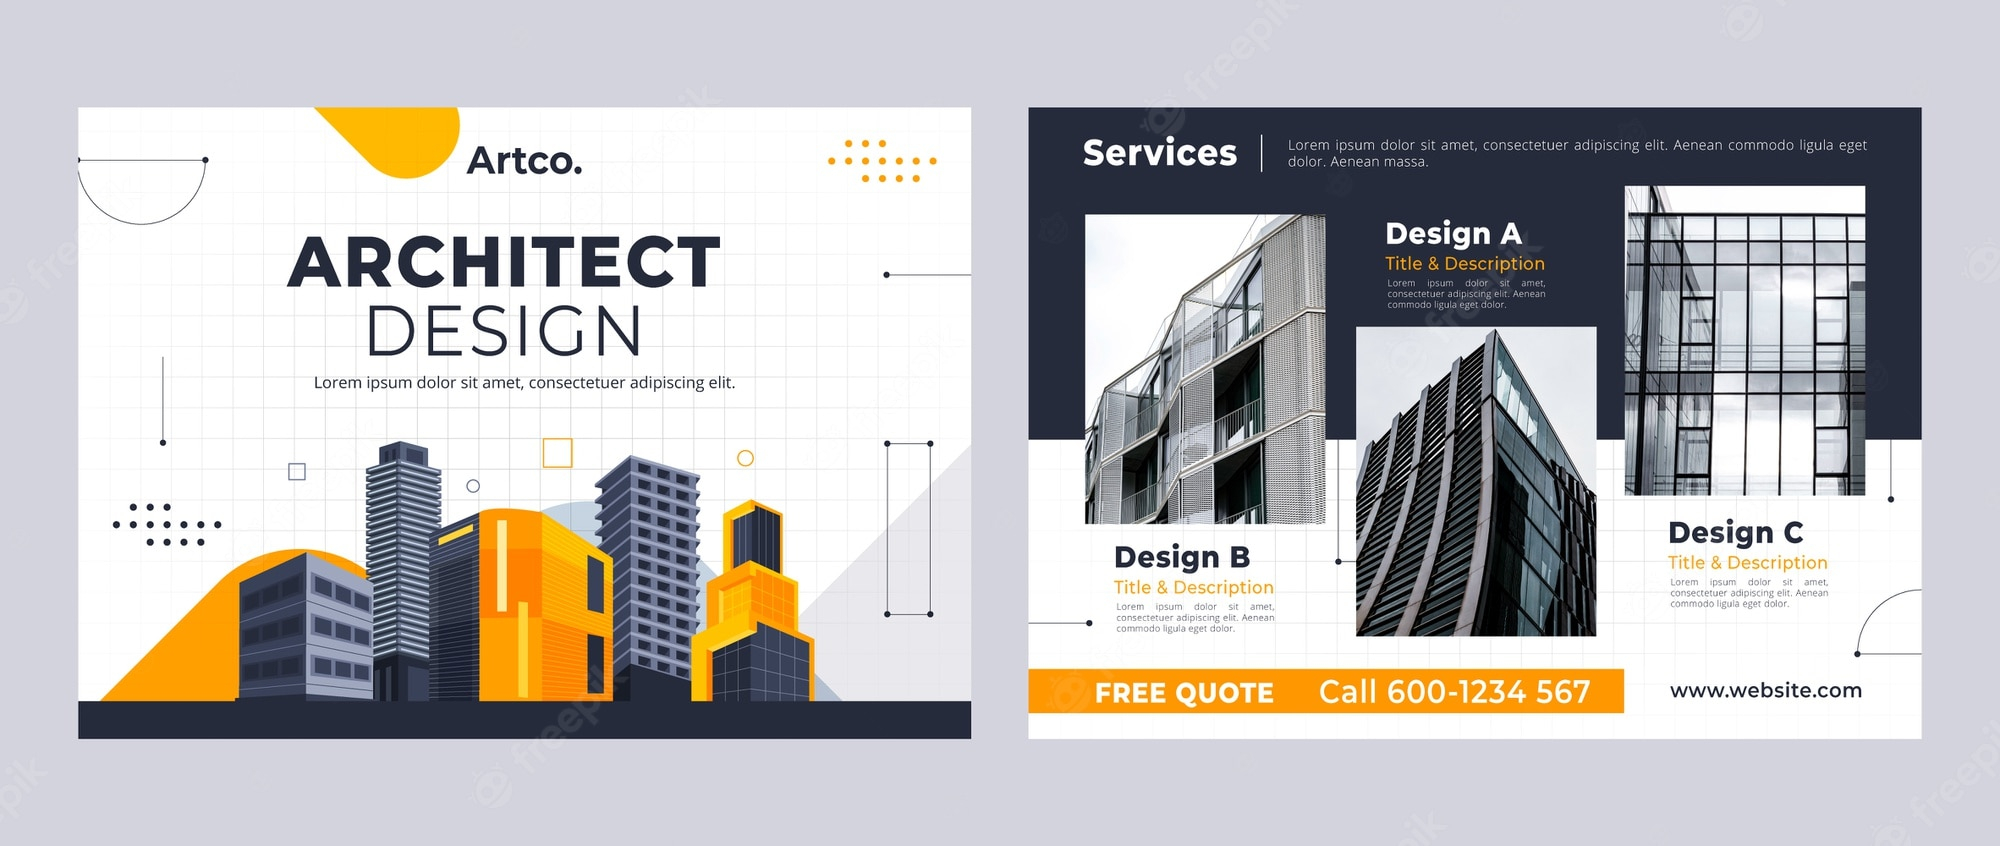 Architecture brochure Vectors & Illustrations for Free Download  Pertaining To Architecture Brochure Templates Free Download